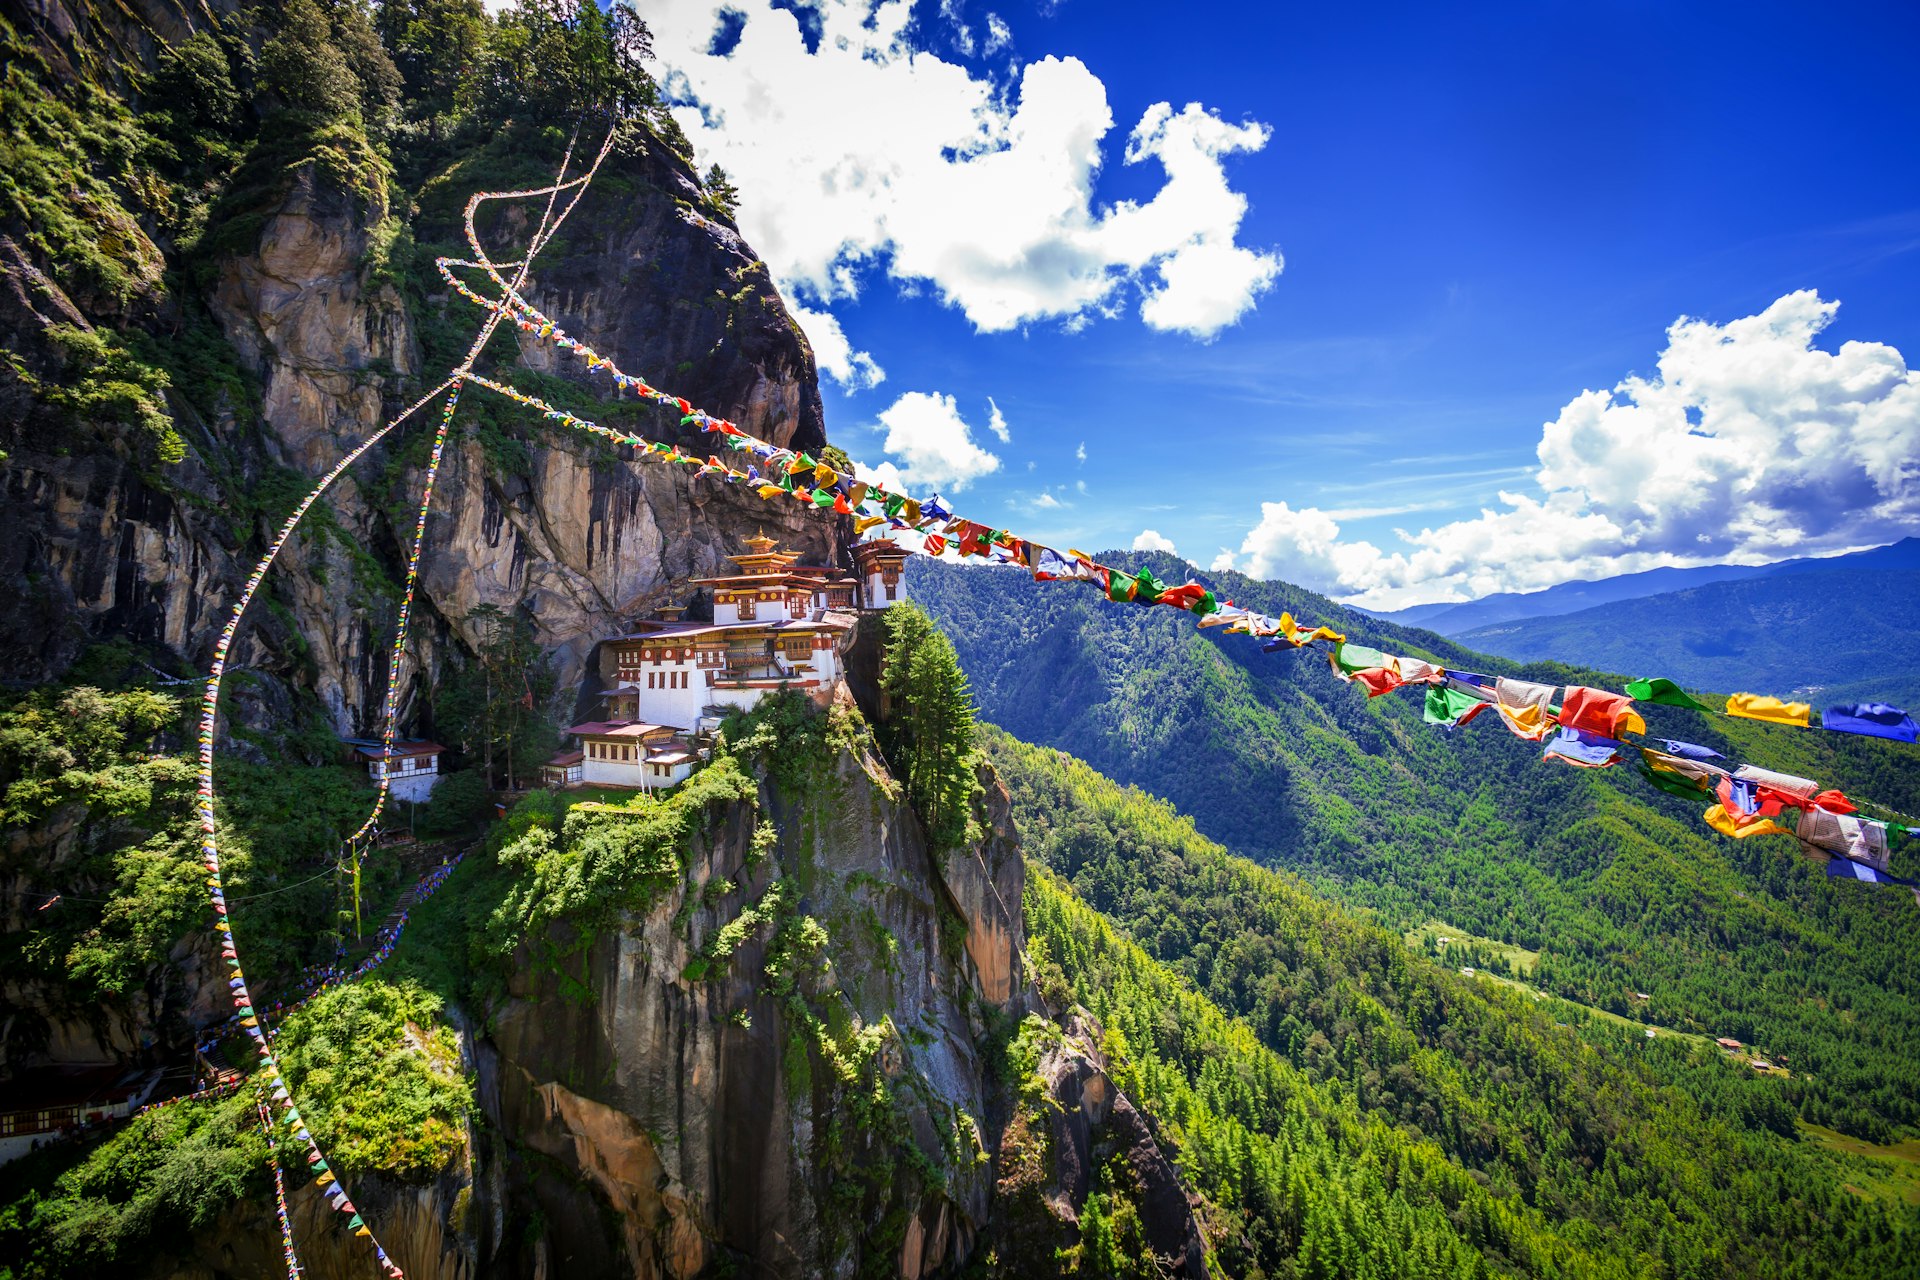 The Taktshang Goemba (Tiger's Nest Monastery), clings to a cliffside in Bhutan